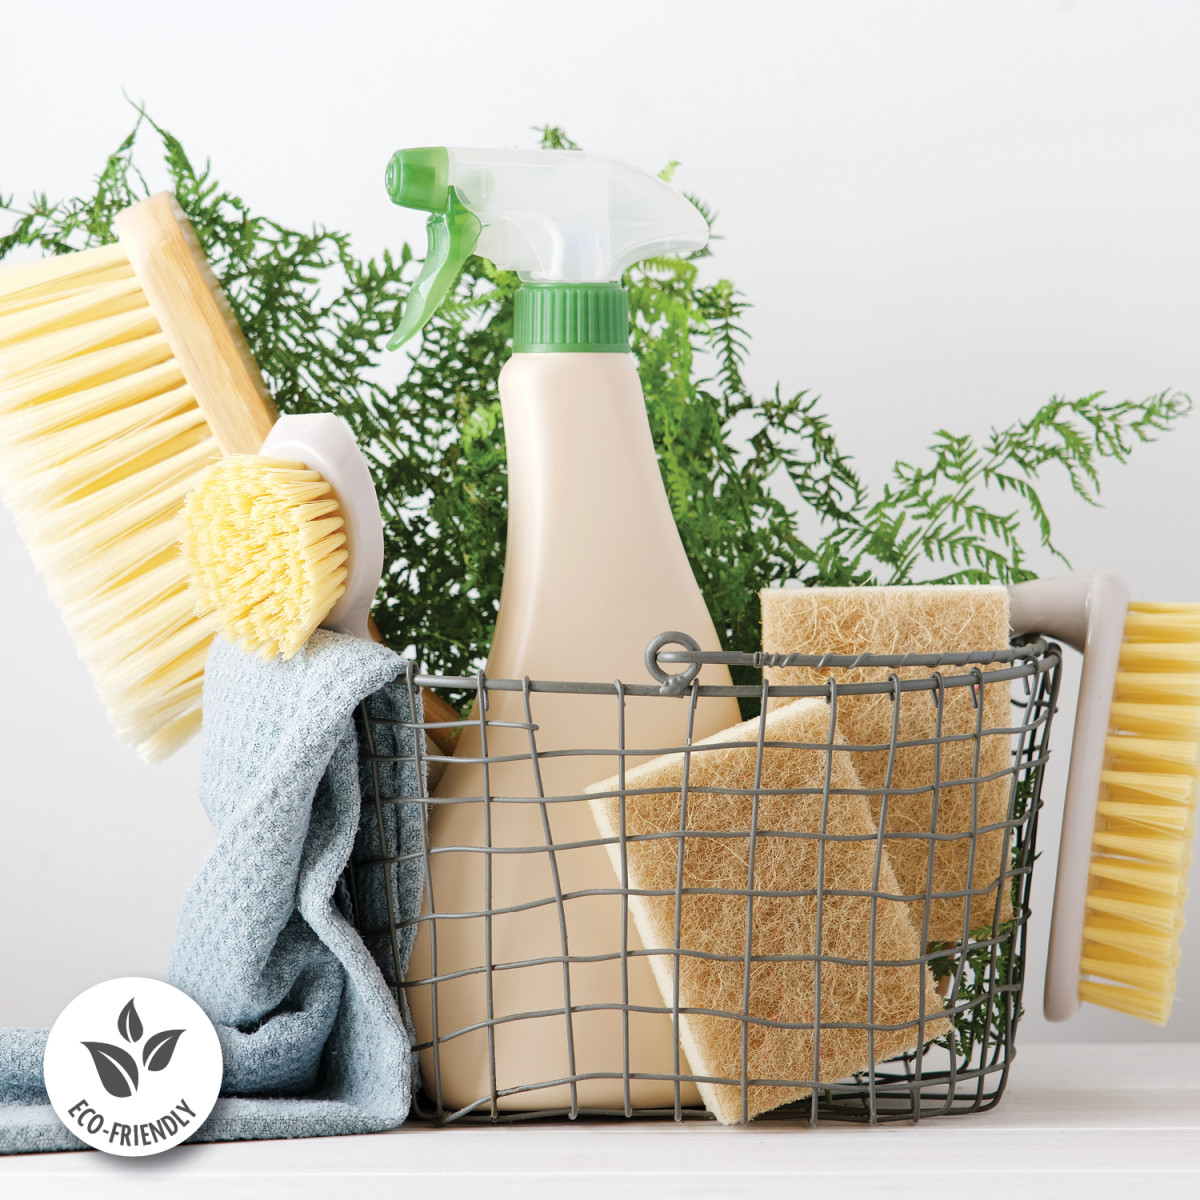 Green Cleaning Solutions for your Home